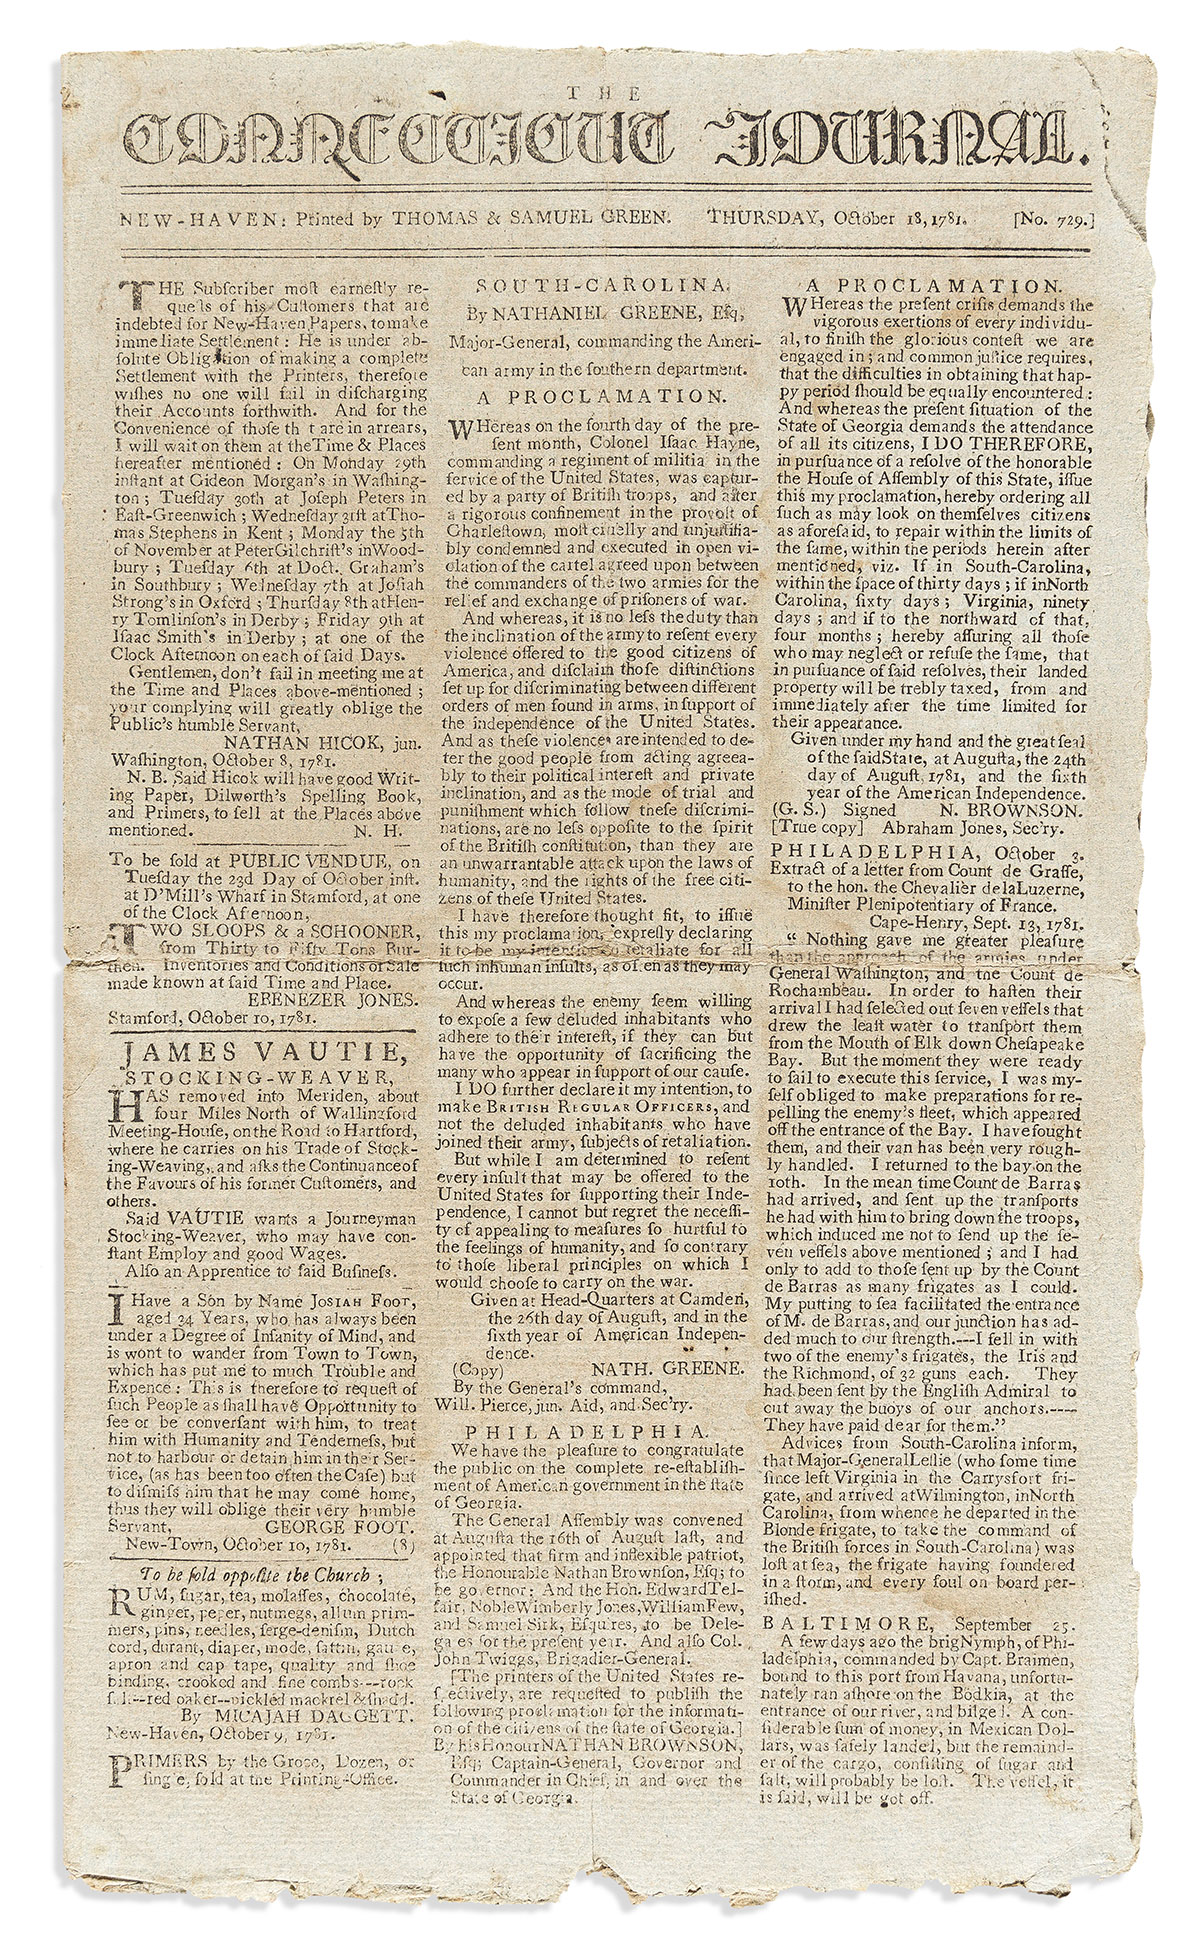 (AMERICAN REVOLUTION--1781.) Issue of the Connecticut Journal describing the start of the Siege of Yorktown.